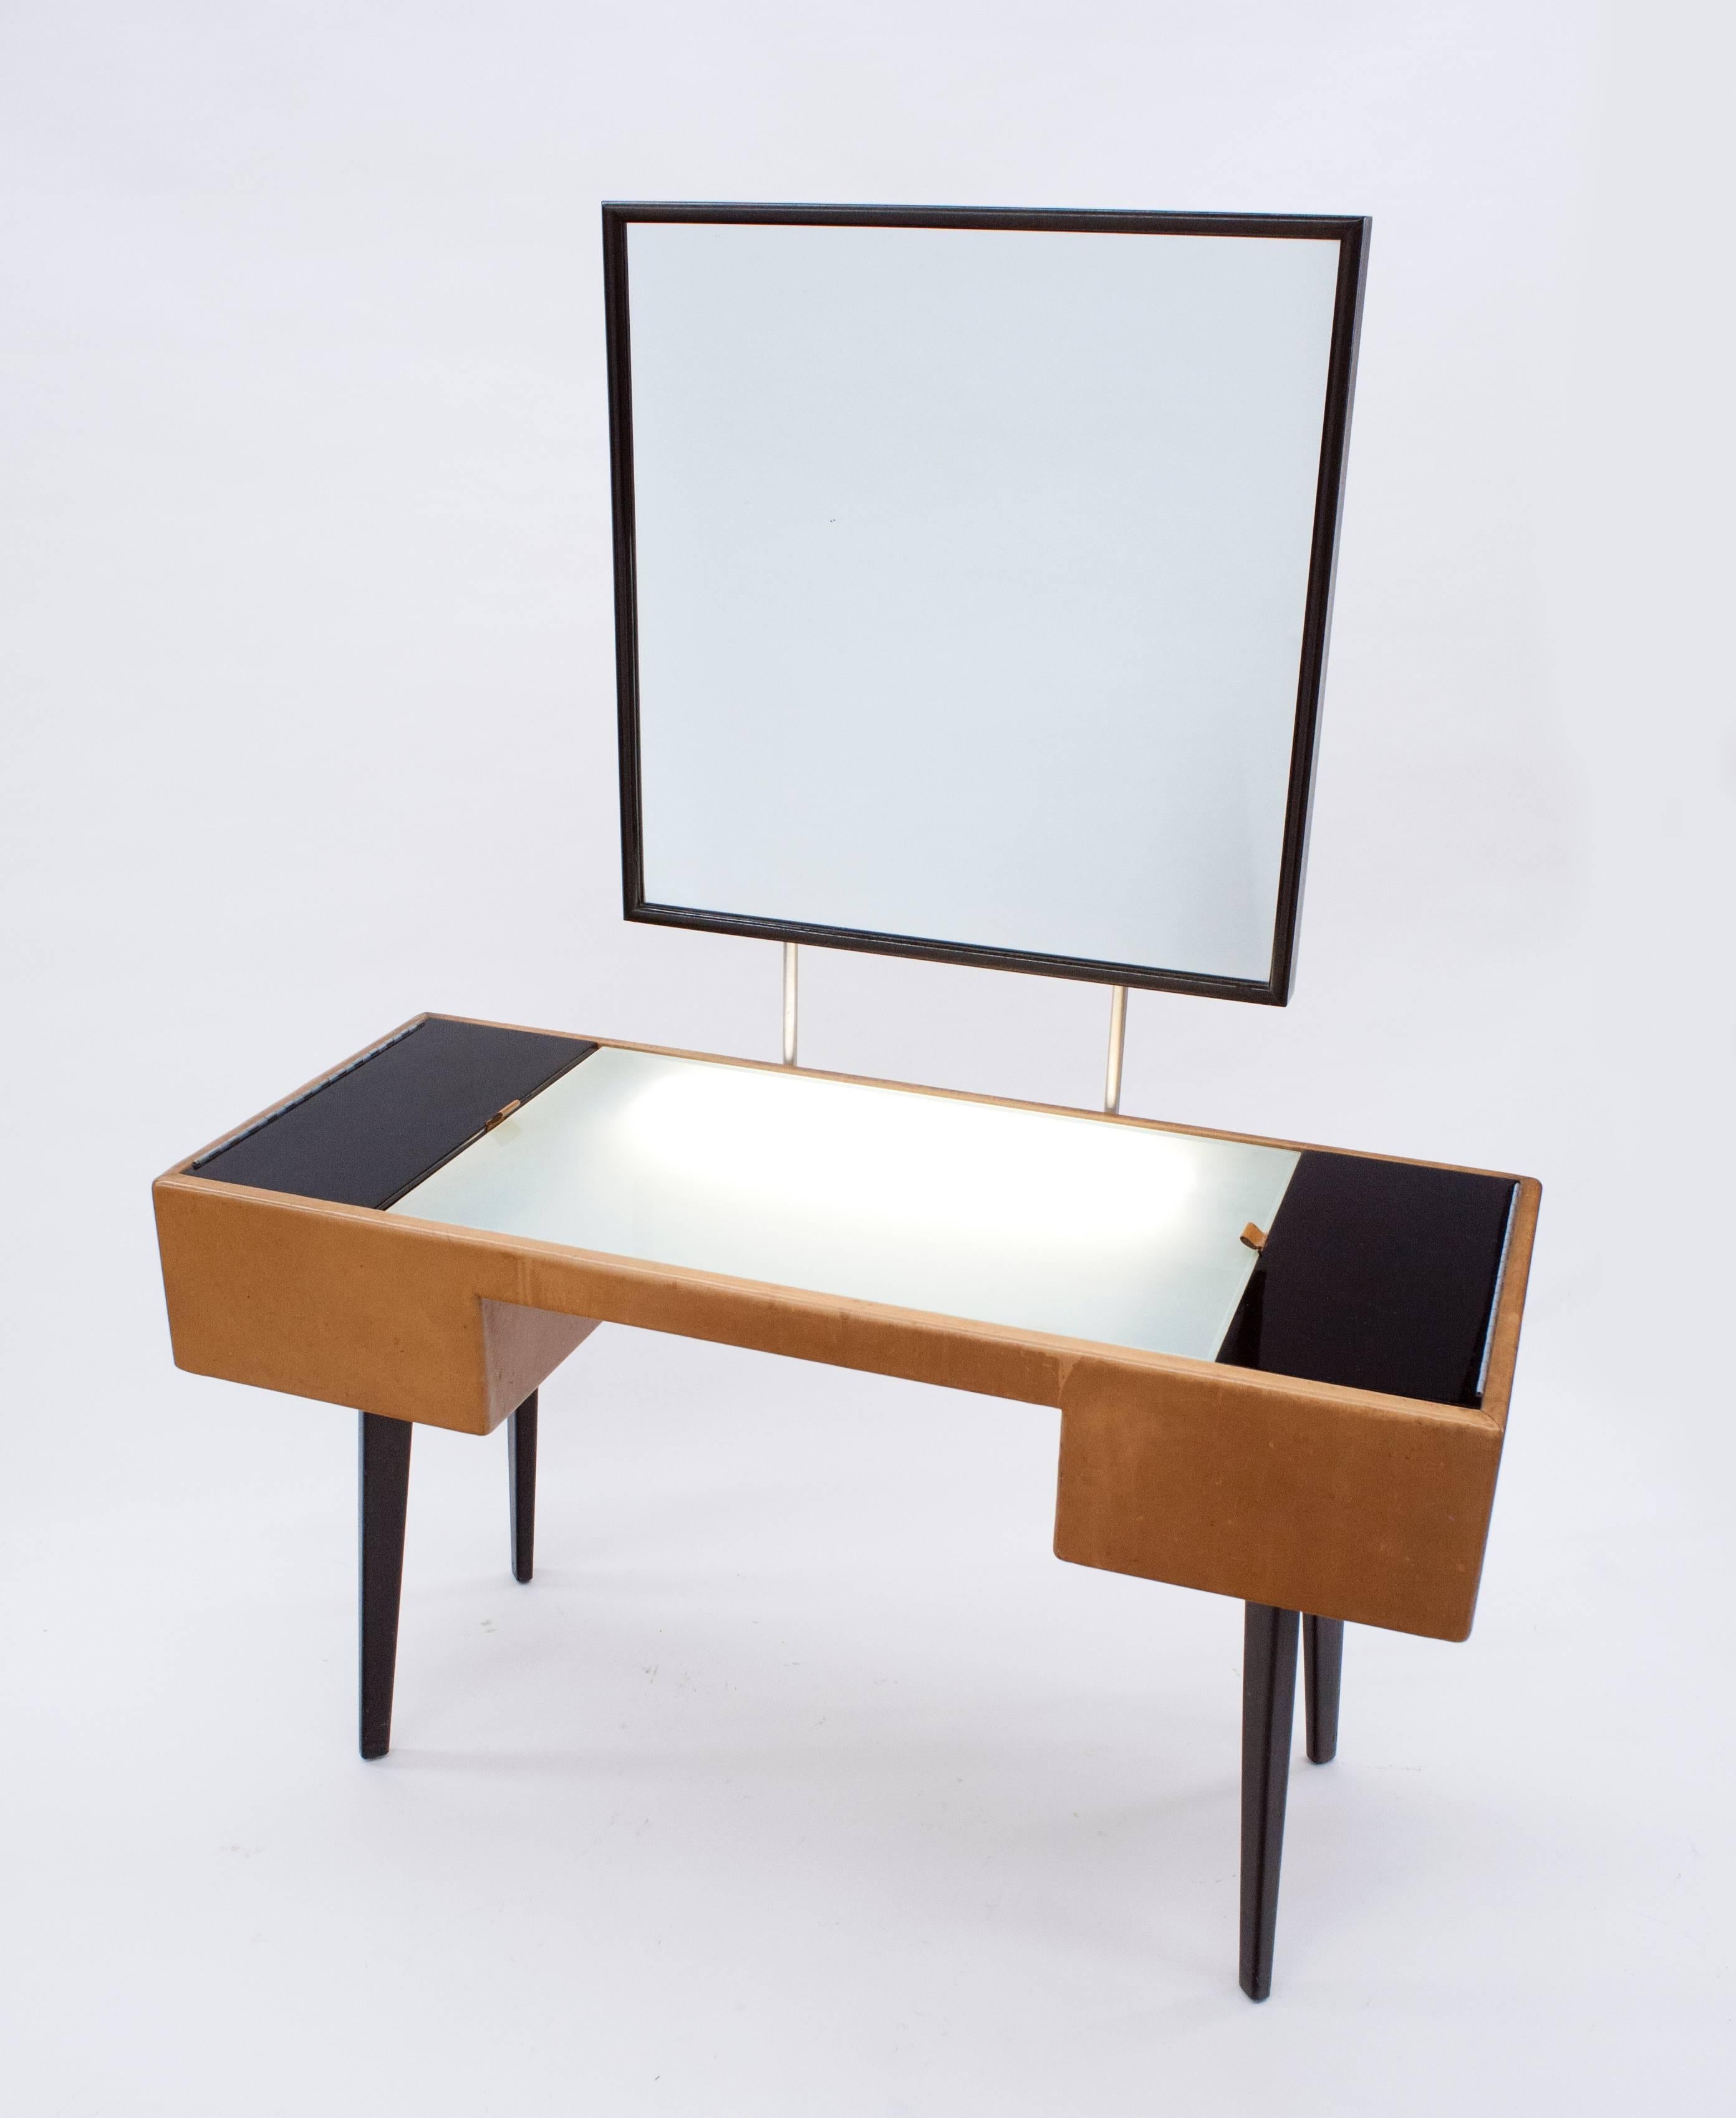 Rare and early Illuminated vanity (model 4660) with original mirror by George Nelson for Herman Miller. Retains original leather pulls to cabinet doors, interior wood trays and original working lighting system with toggle switch. Chair in photos